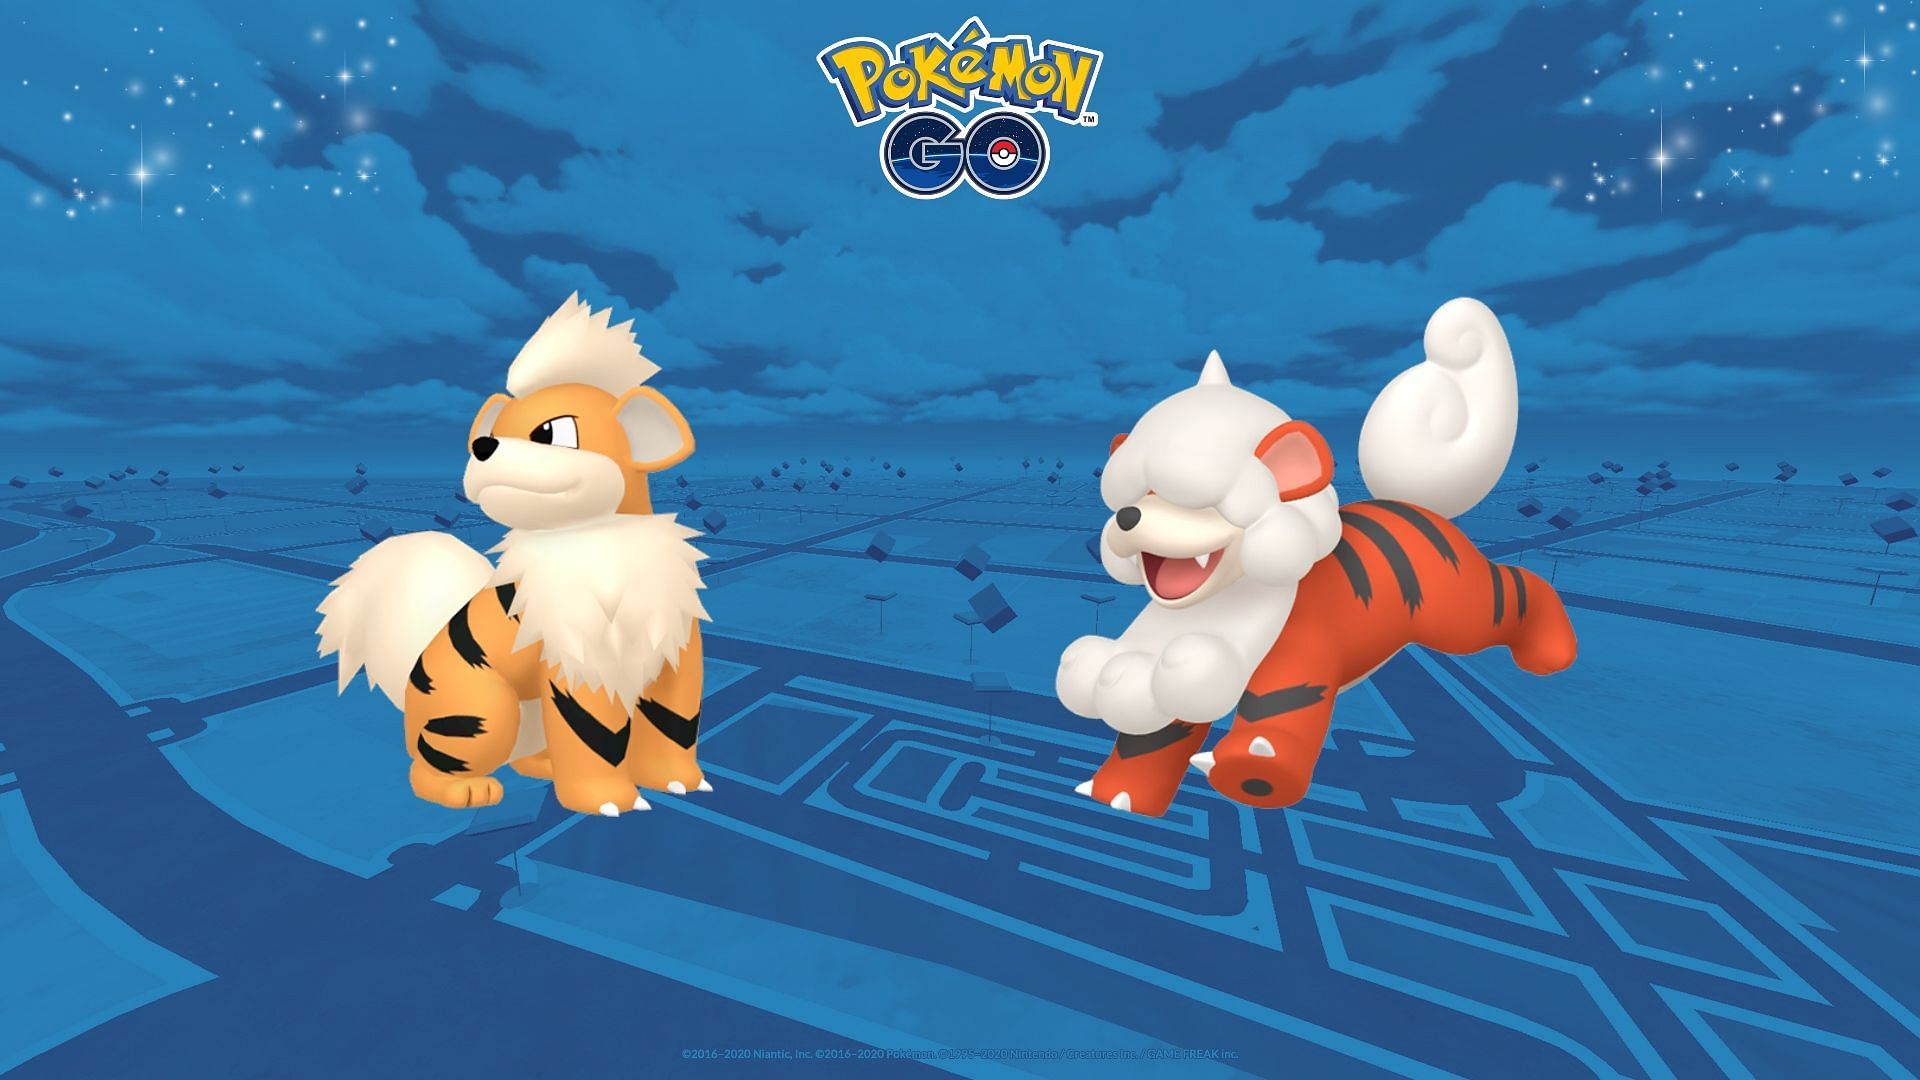 How to get Growlithe and Hisuian Growlithe, and are they shiny in Pokemon GO?